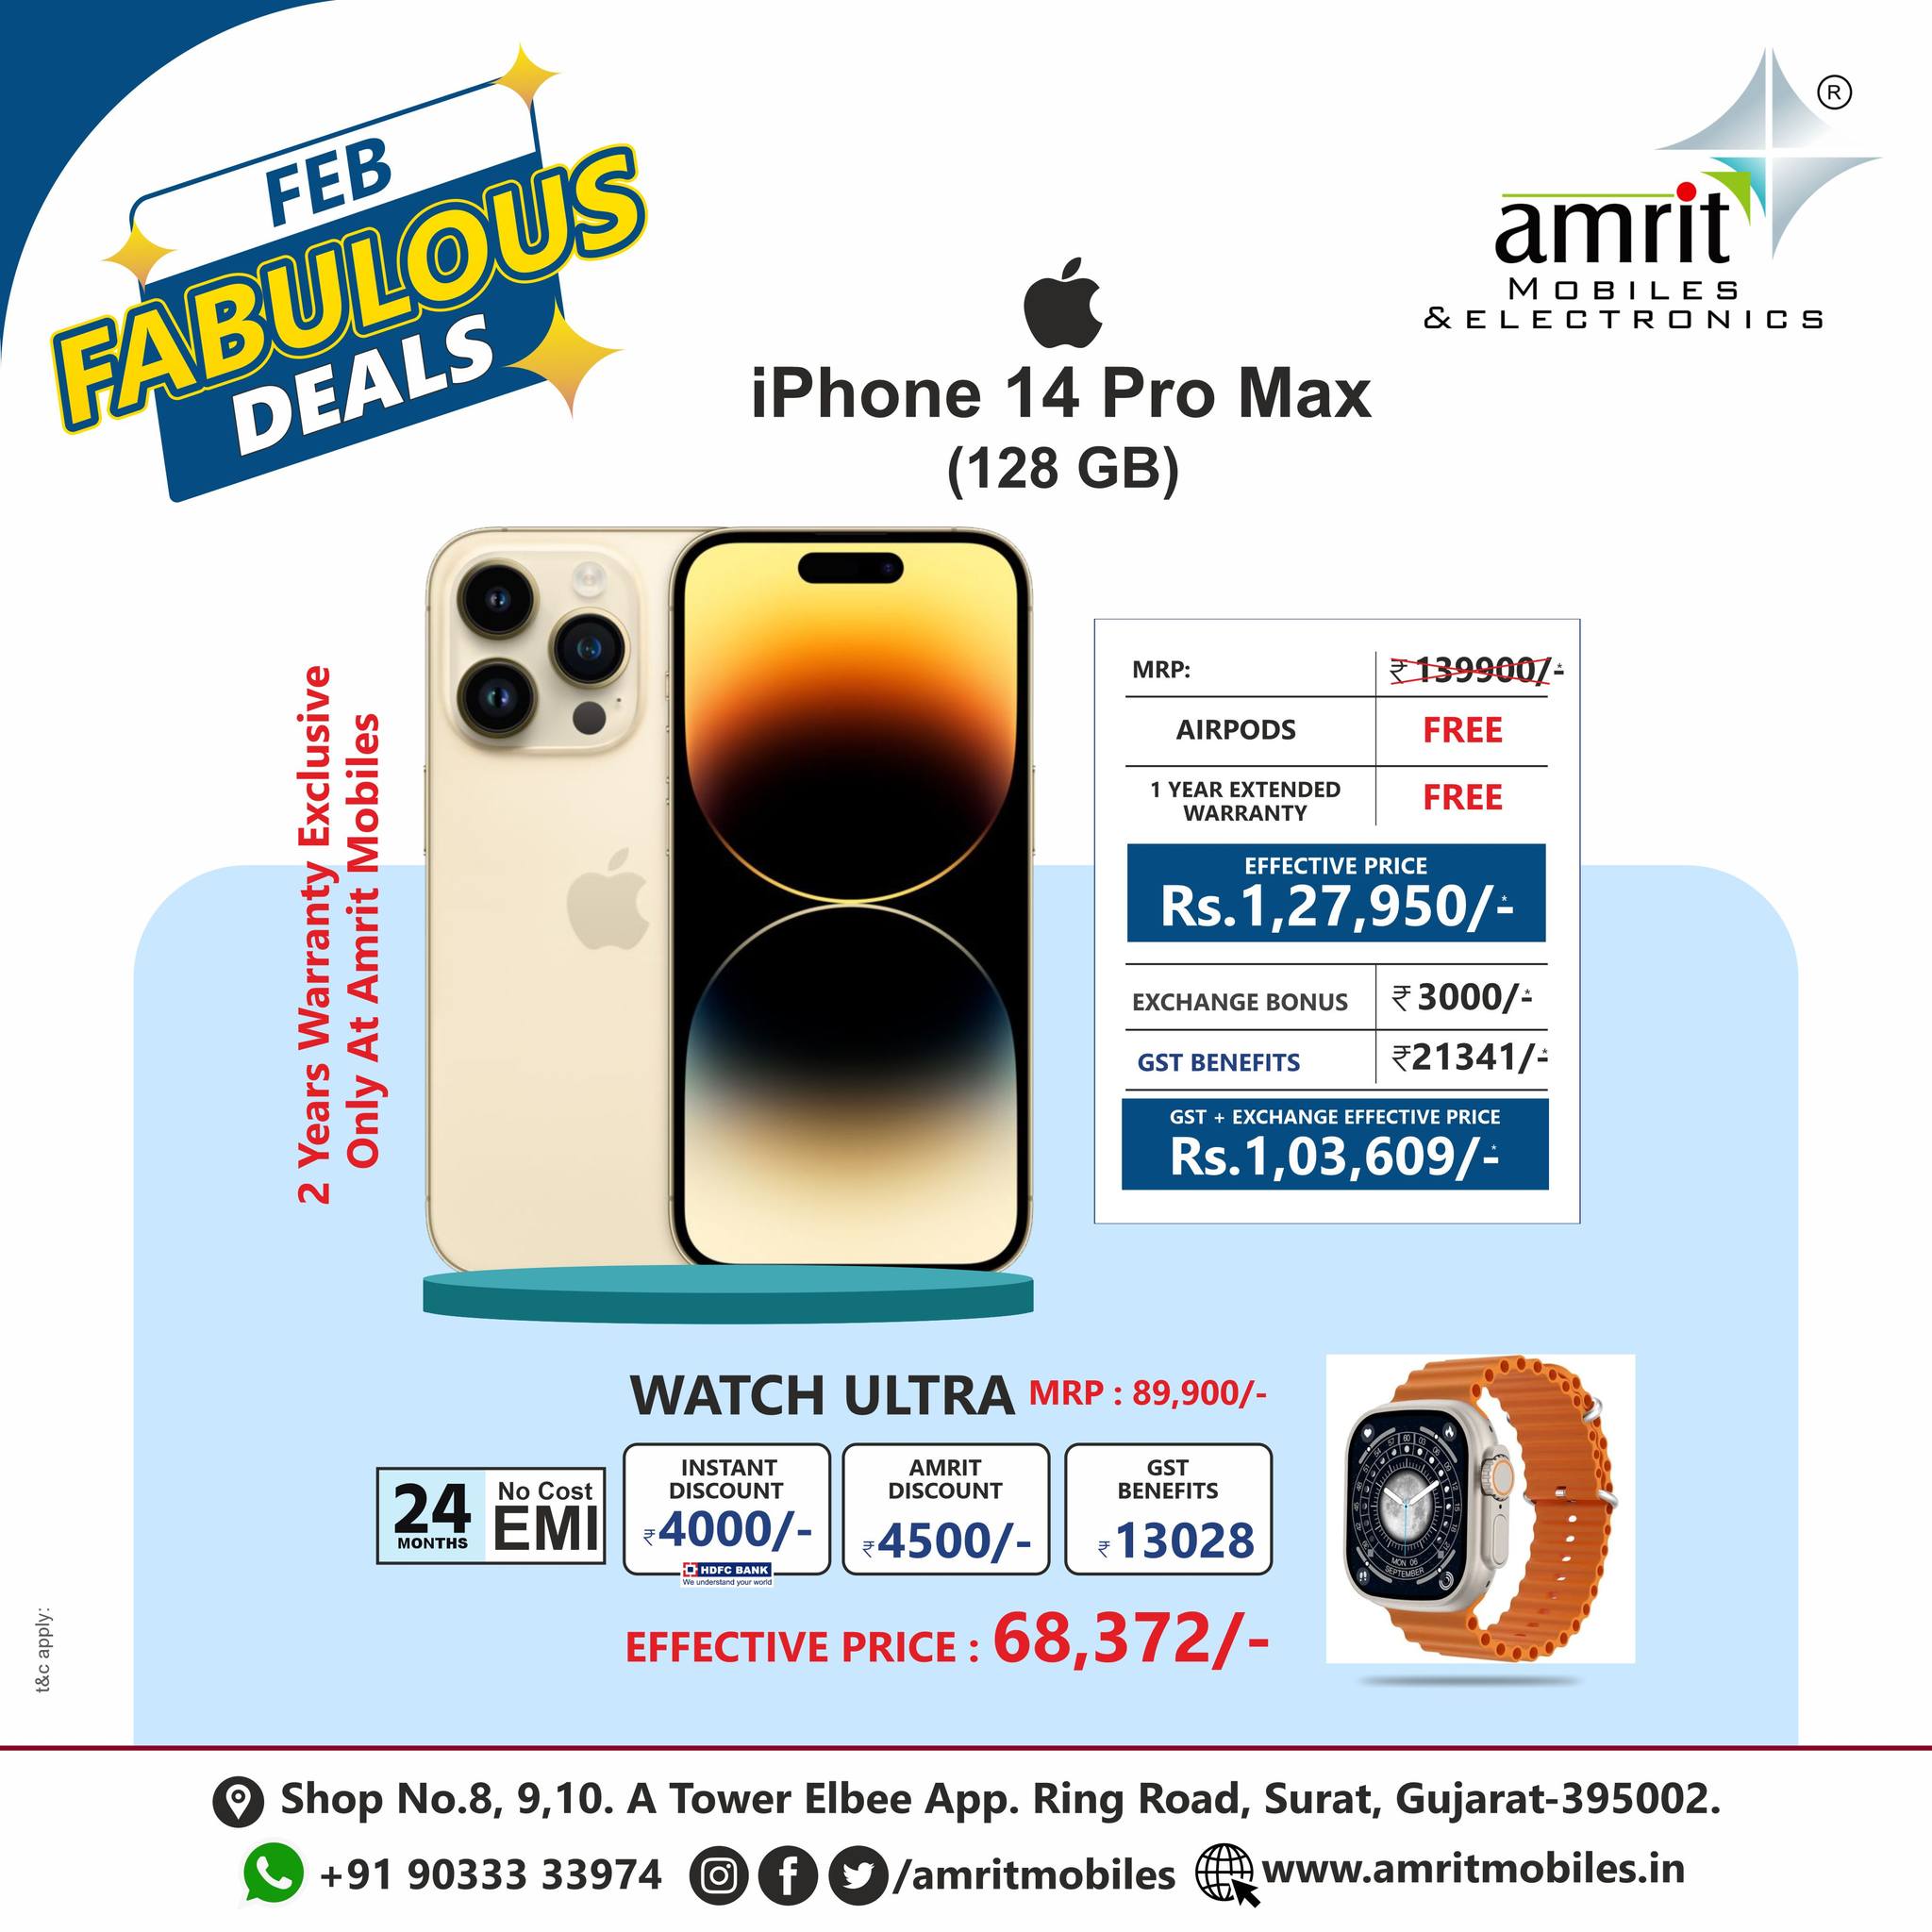 Amrit Mobiles & Electronics - सबसे बड़ी #REPUBLICDAYOFFER 🤩An Exclusive  Offer Live at Amrit Mobiles & Electronics 🤩 👉 Available Offers : ✓  Cashback Offer ✓ Per Day EMI ✓ No Cost